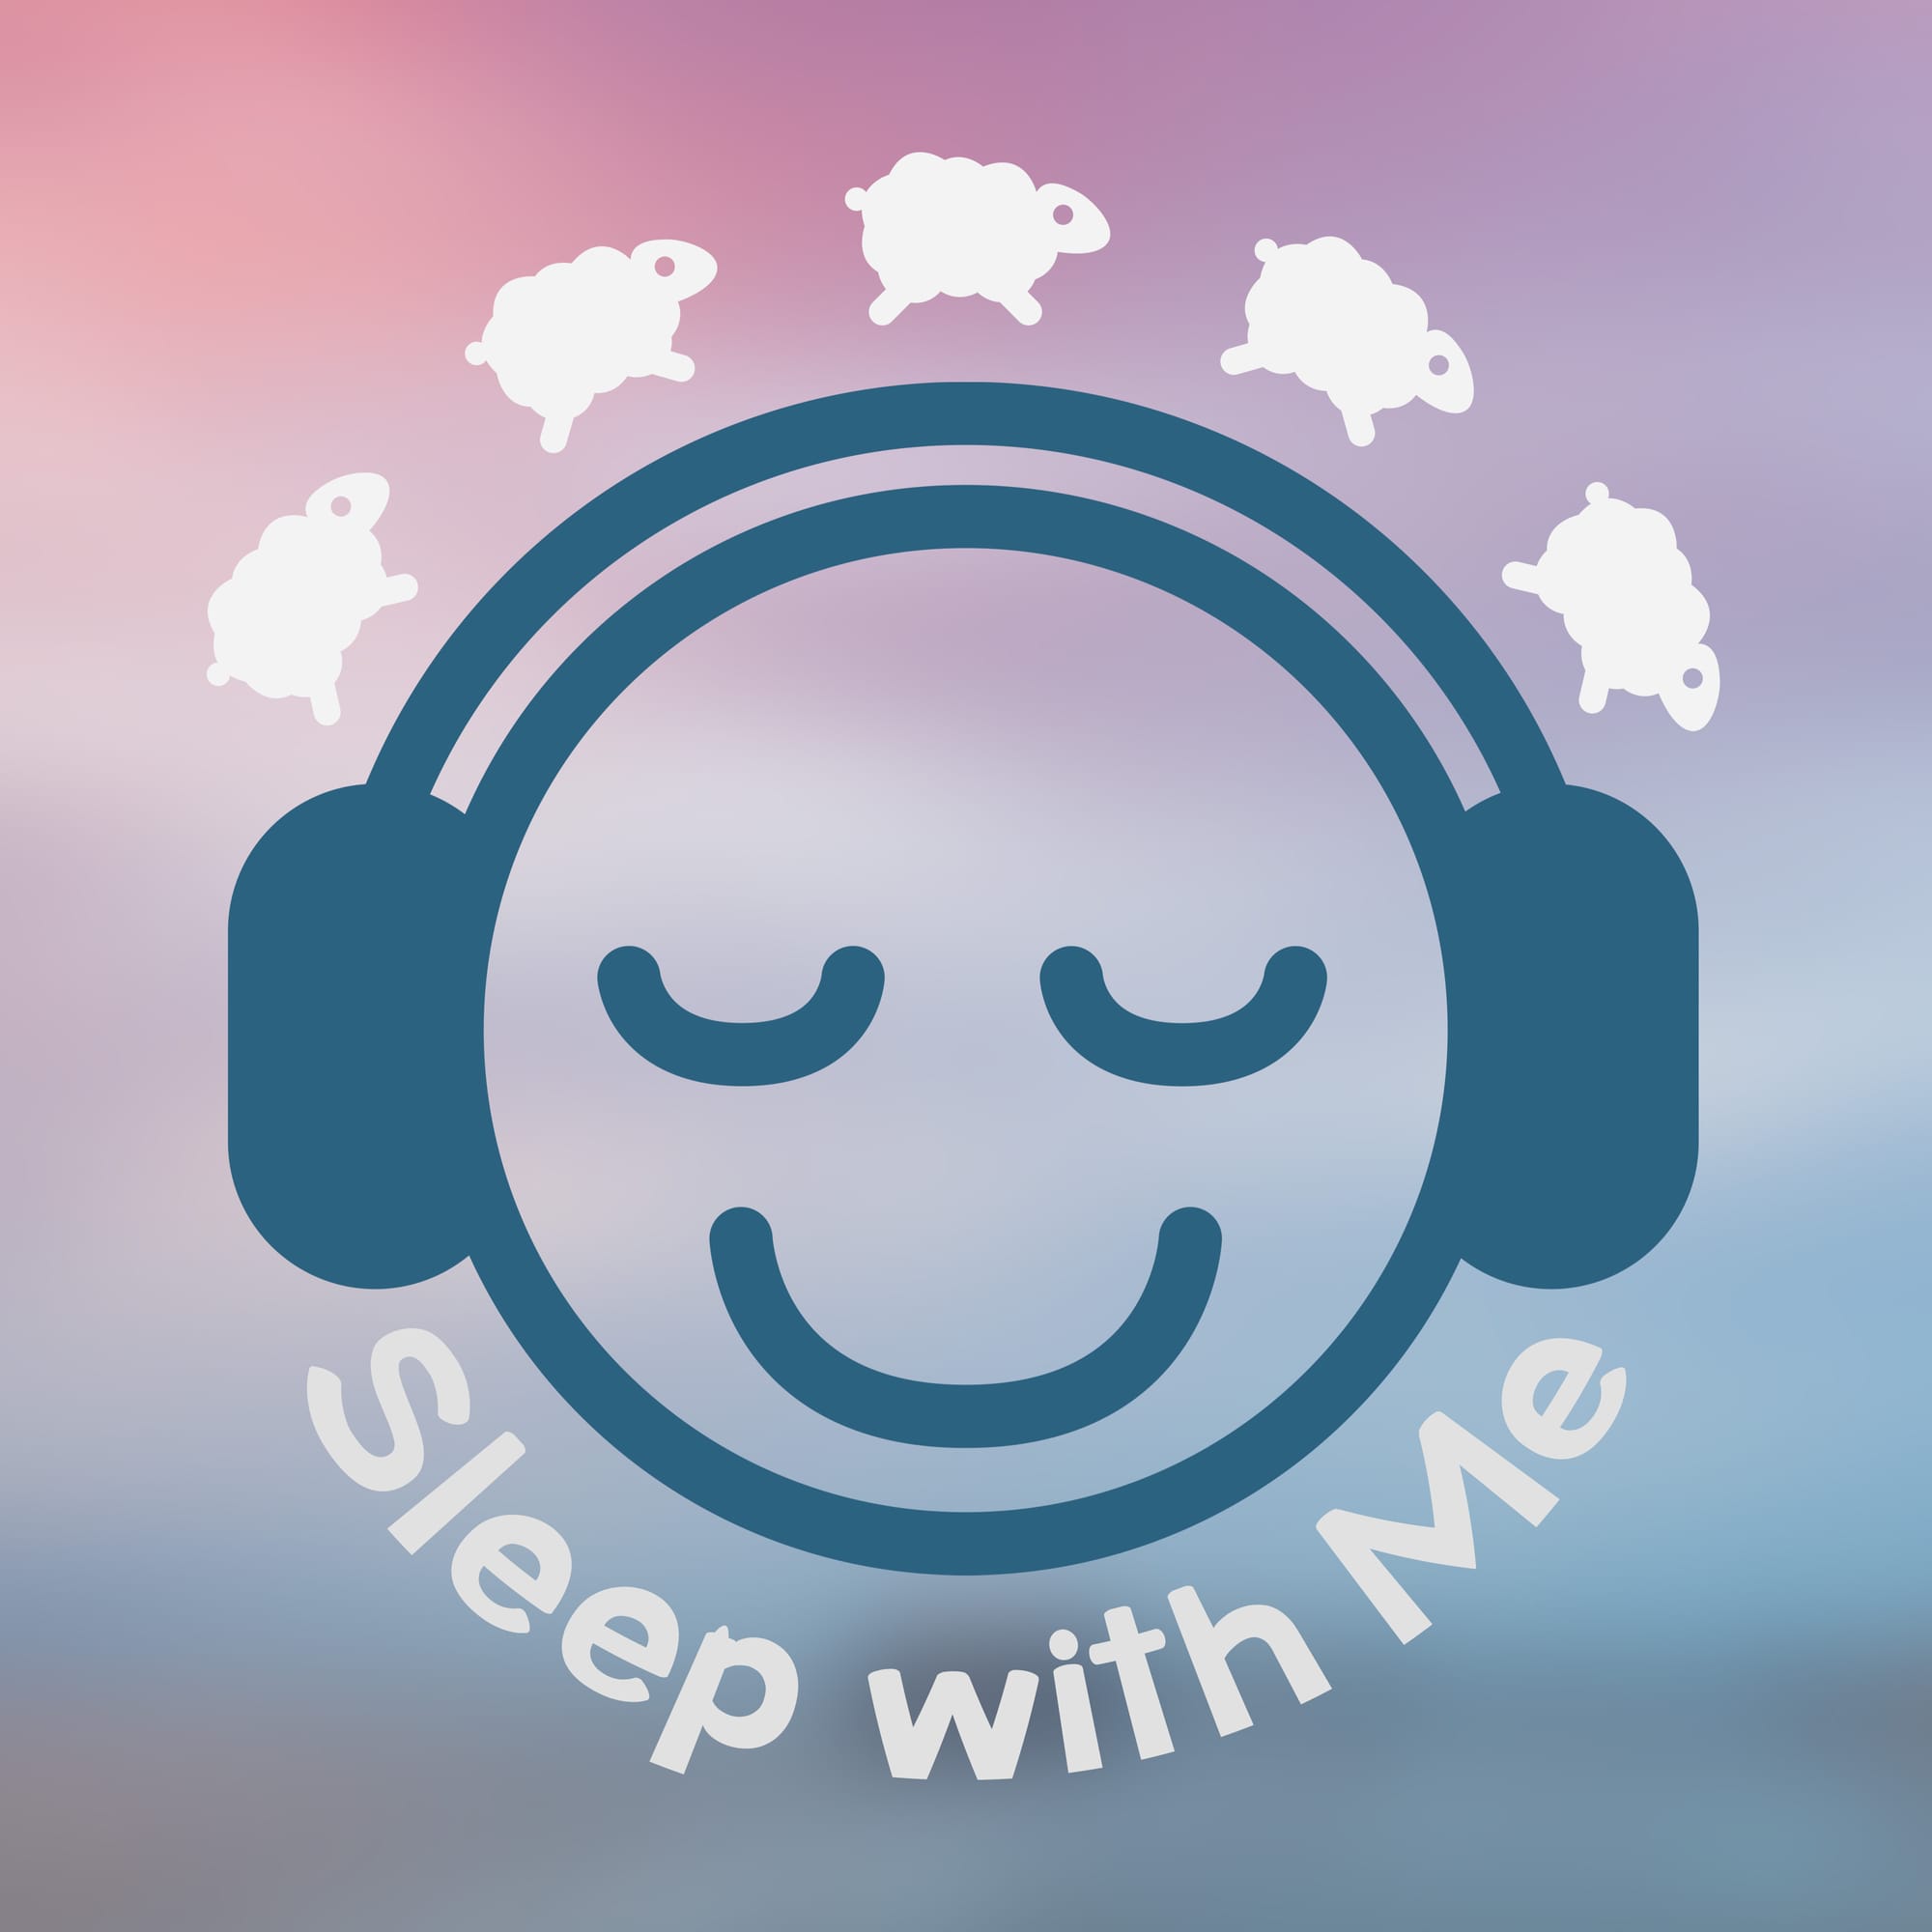 A contented smiley face listening to headphones with sheep floating above. "Sleep WIth Me"